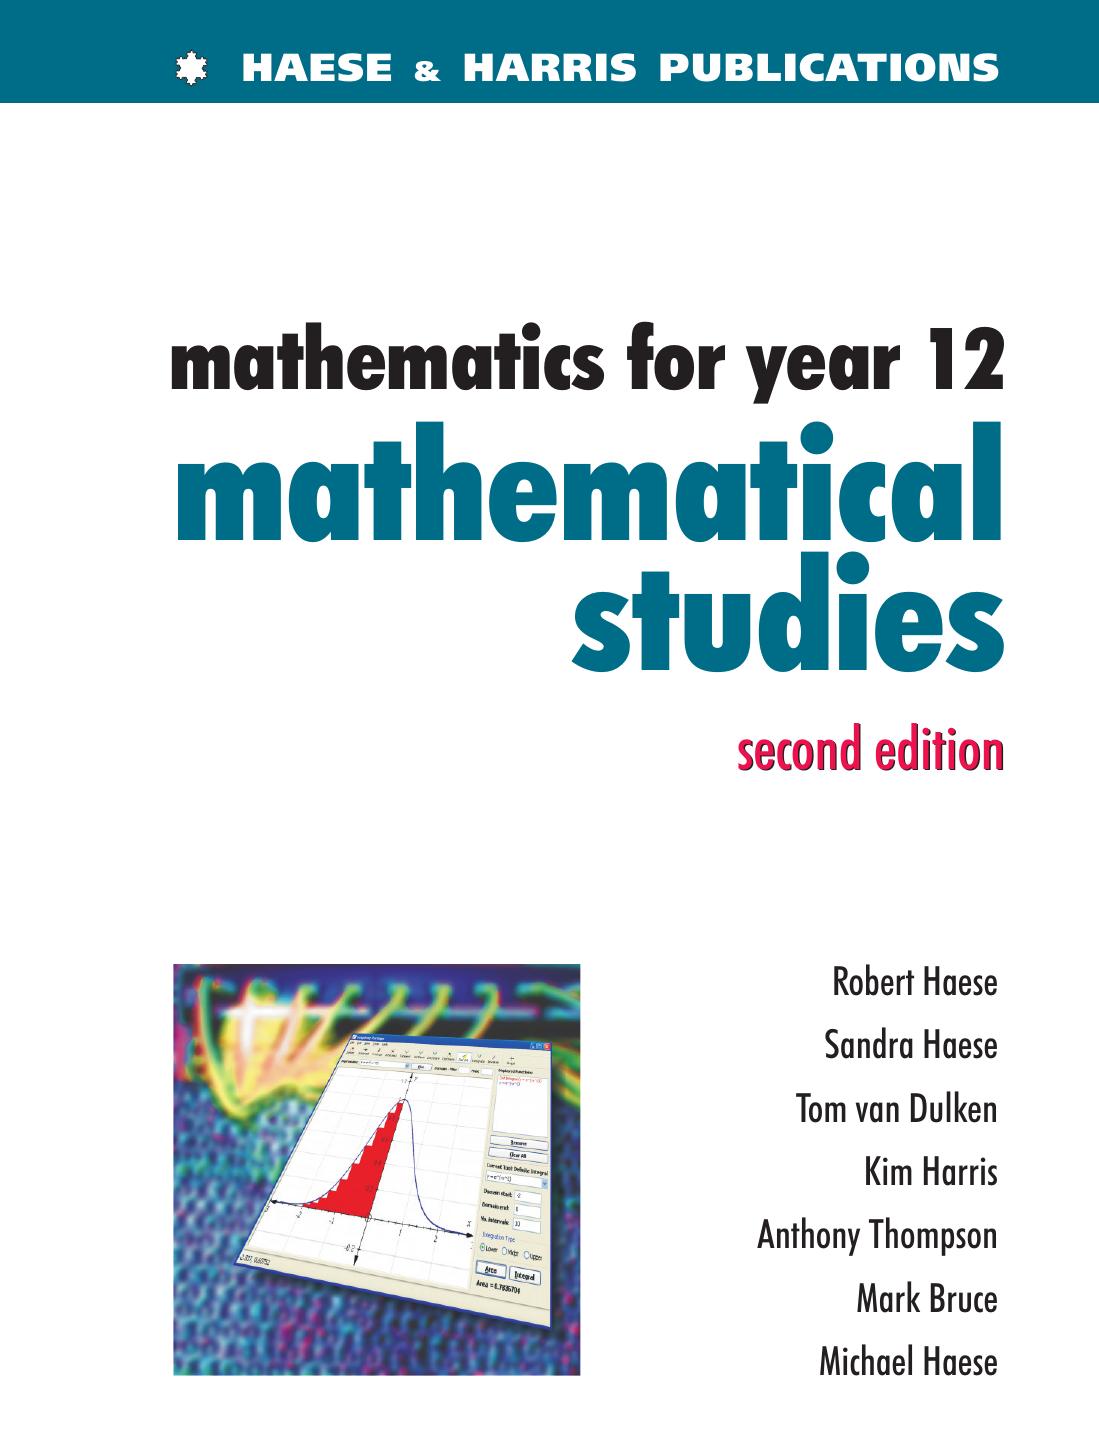 Mathematics for Year 12 Mathematical Studies Second Edition